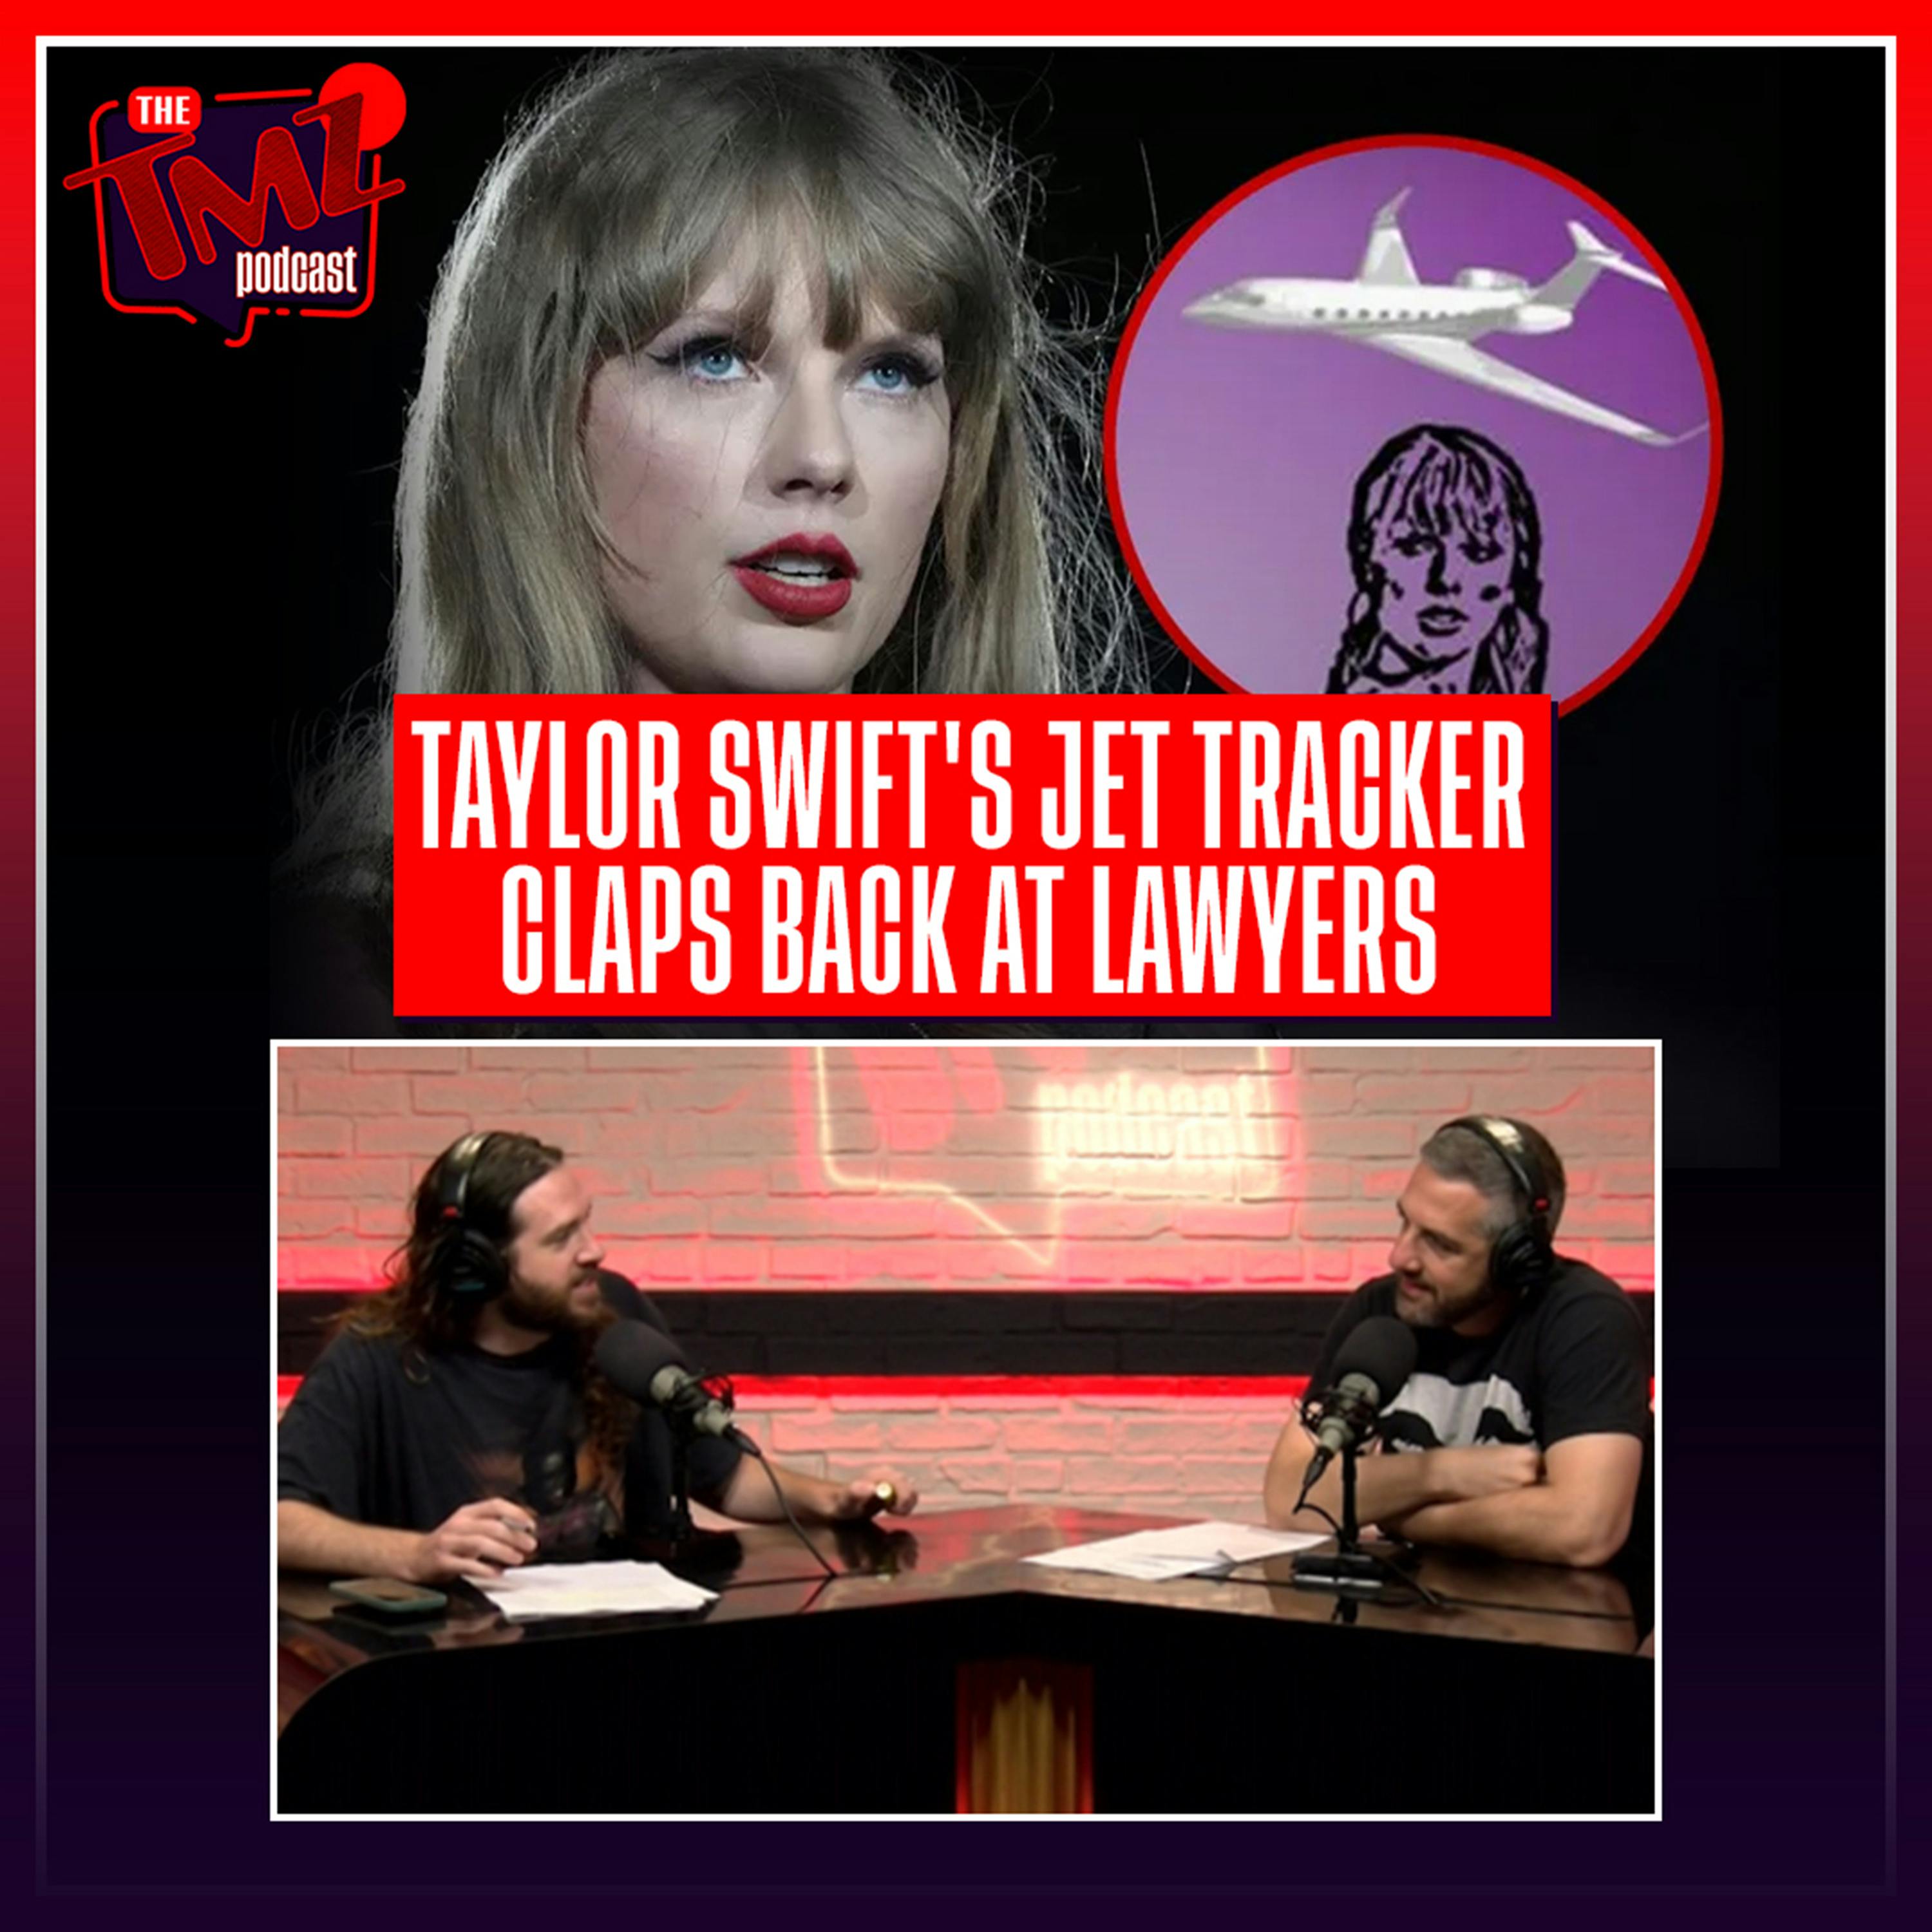 Taylor Swift's Flight Tracker Claps Back With Lengthy Legal Letter